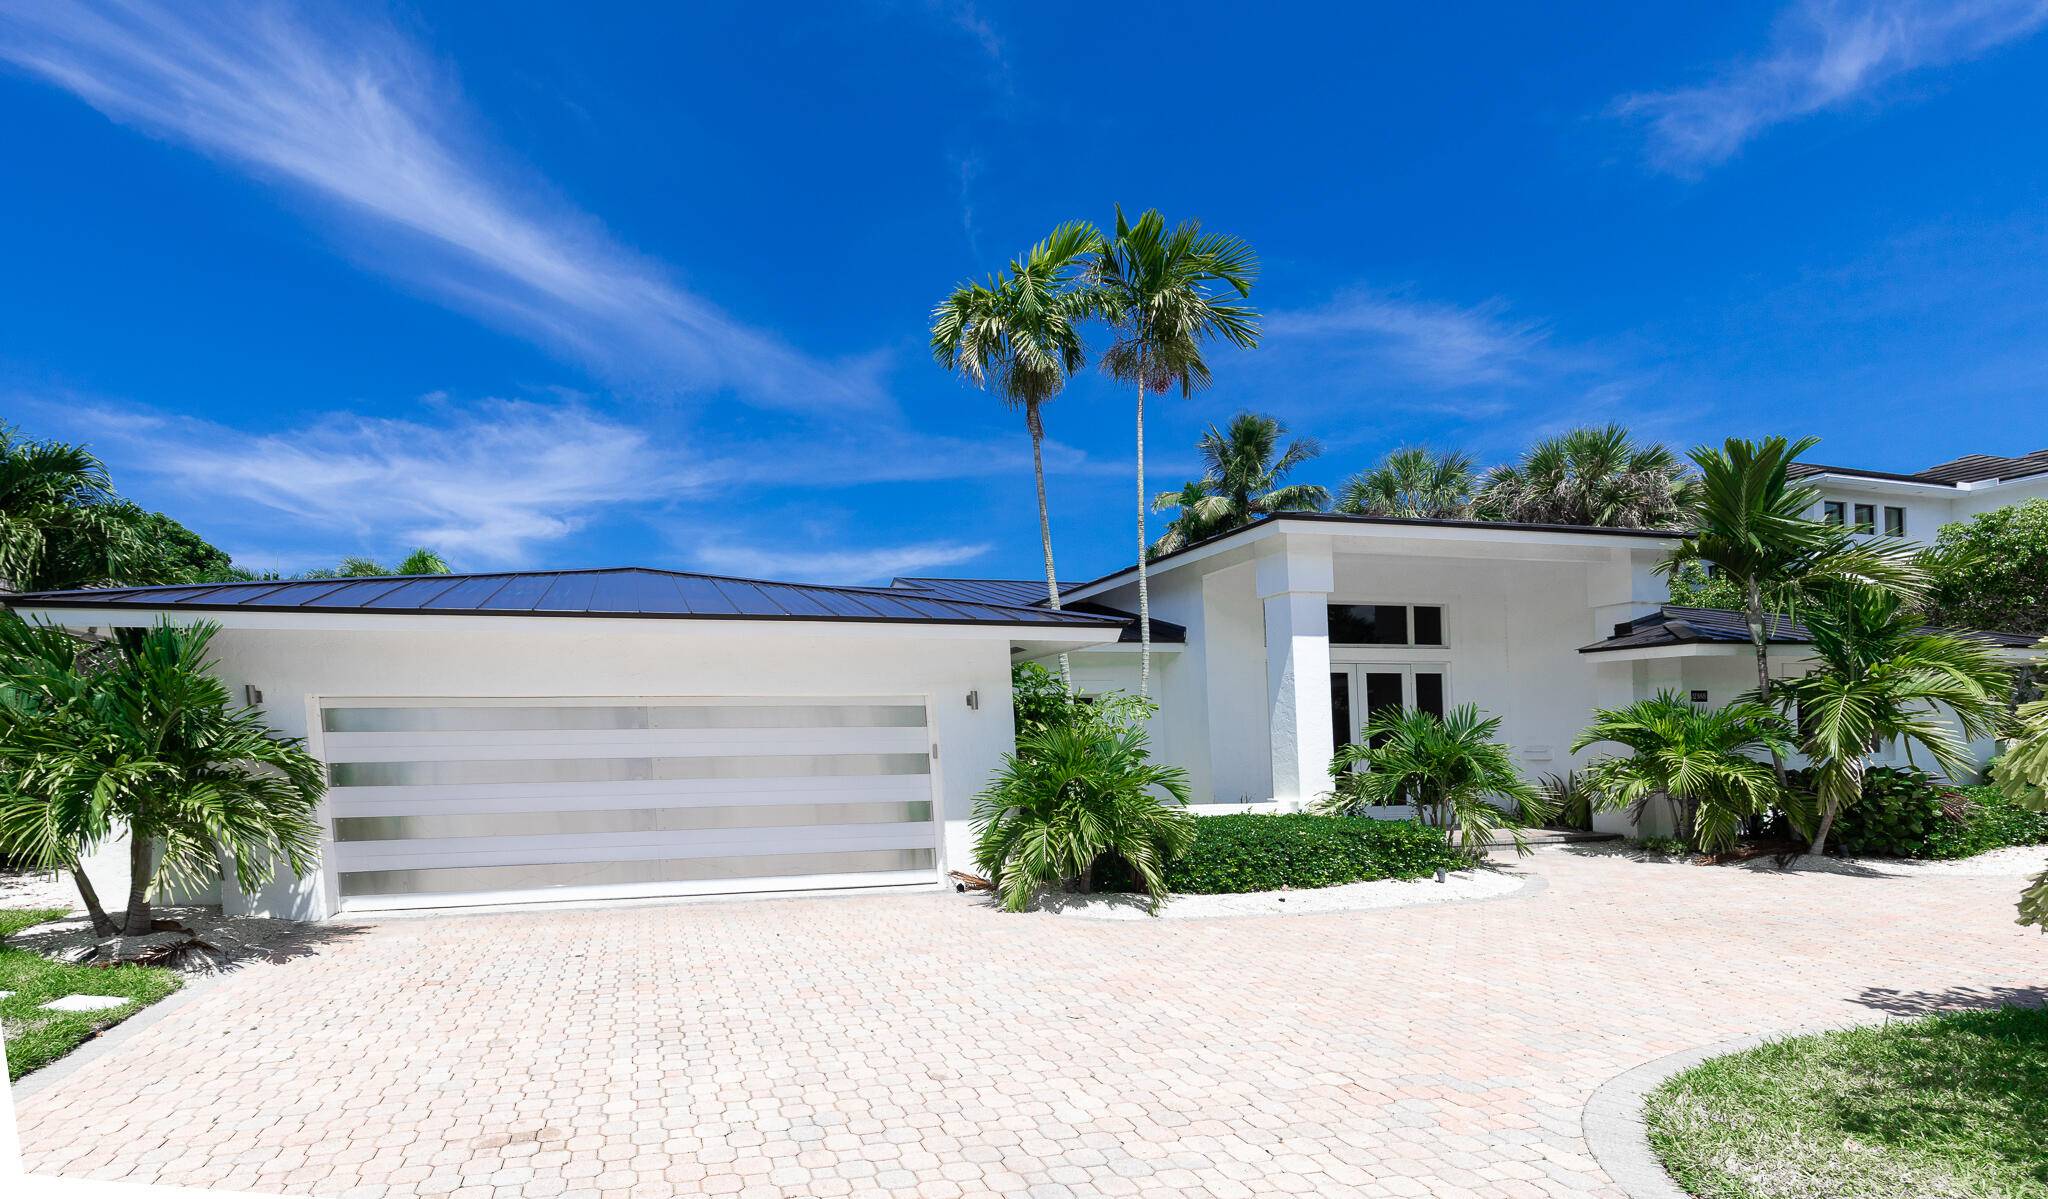 Welcome to the epitome of luxurious living at 2388 Queen Palm Road, nestled in the highly prestigious Royal Palm Yacht and Country Club of Boca Raton.